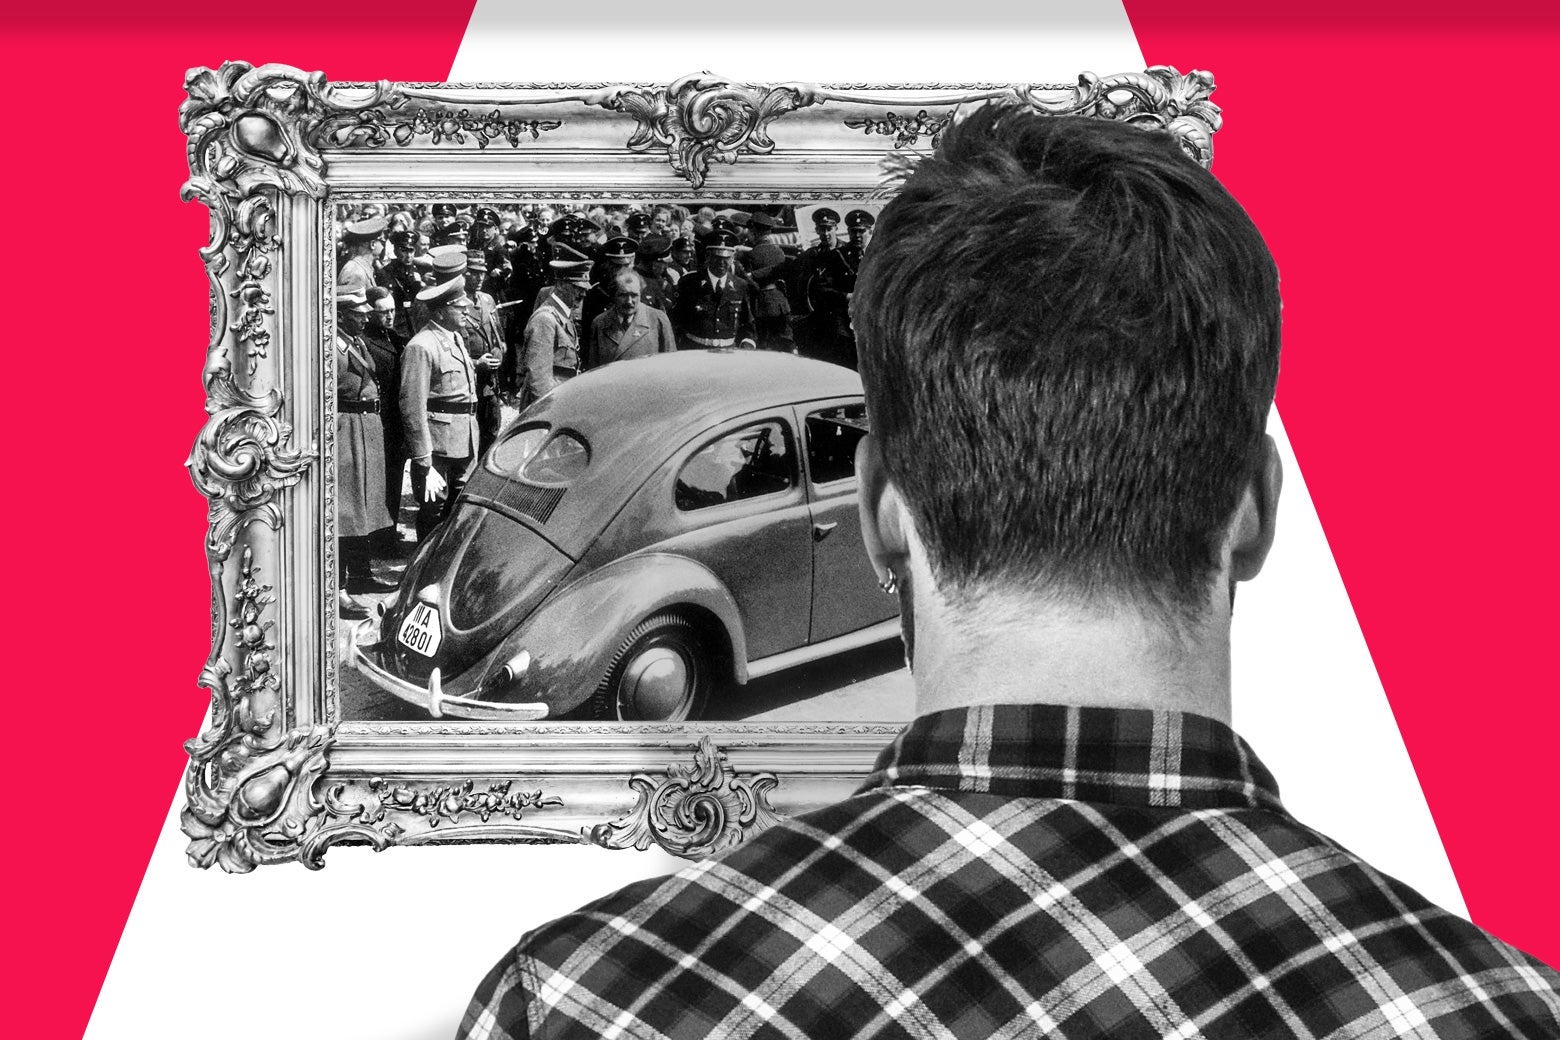 A man seen from the back looking at a framed image of Hitler in a crowd of people looking at a Volkswagen car.